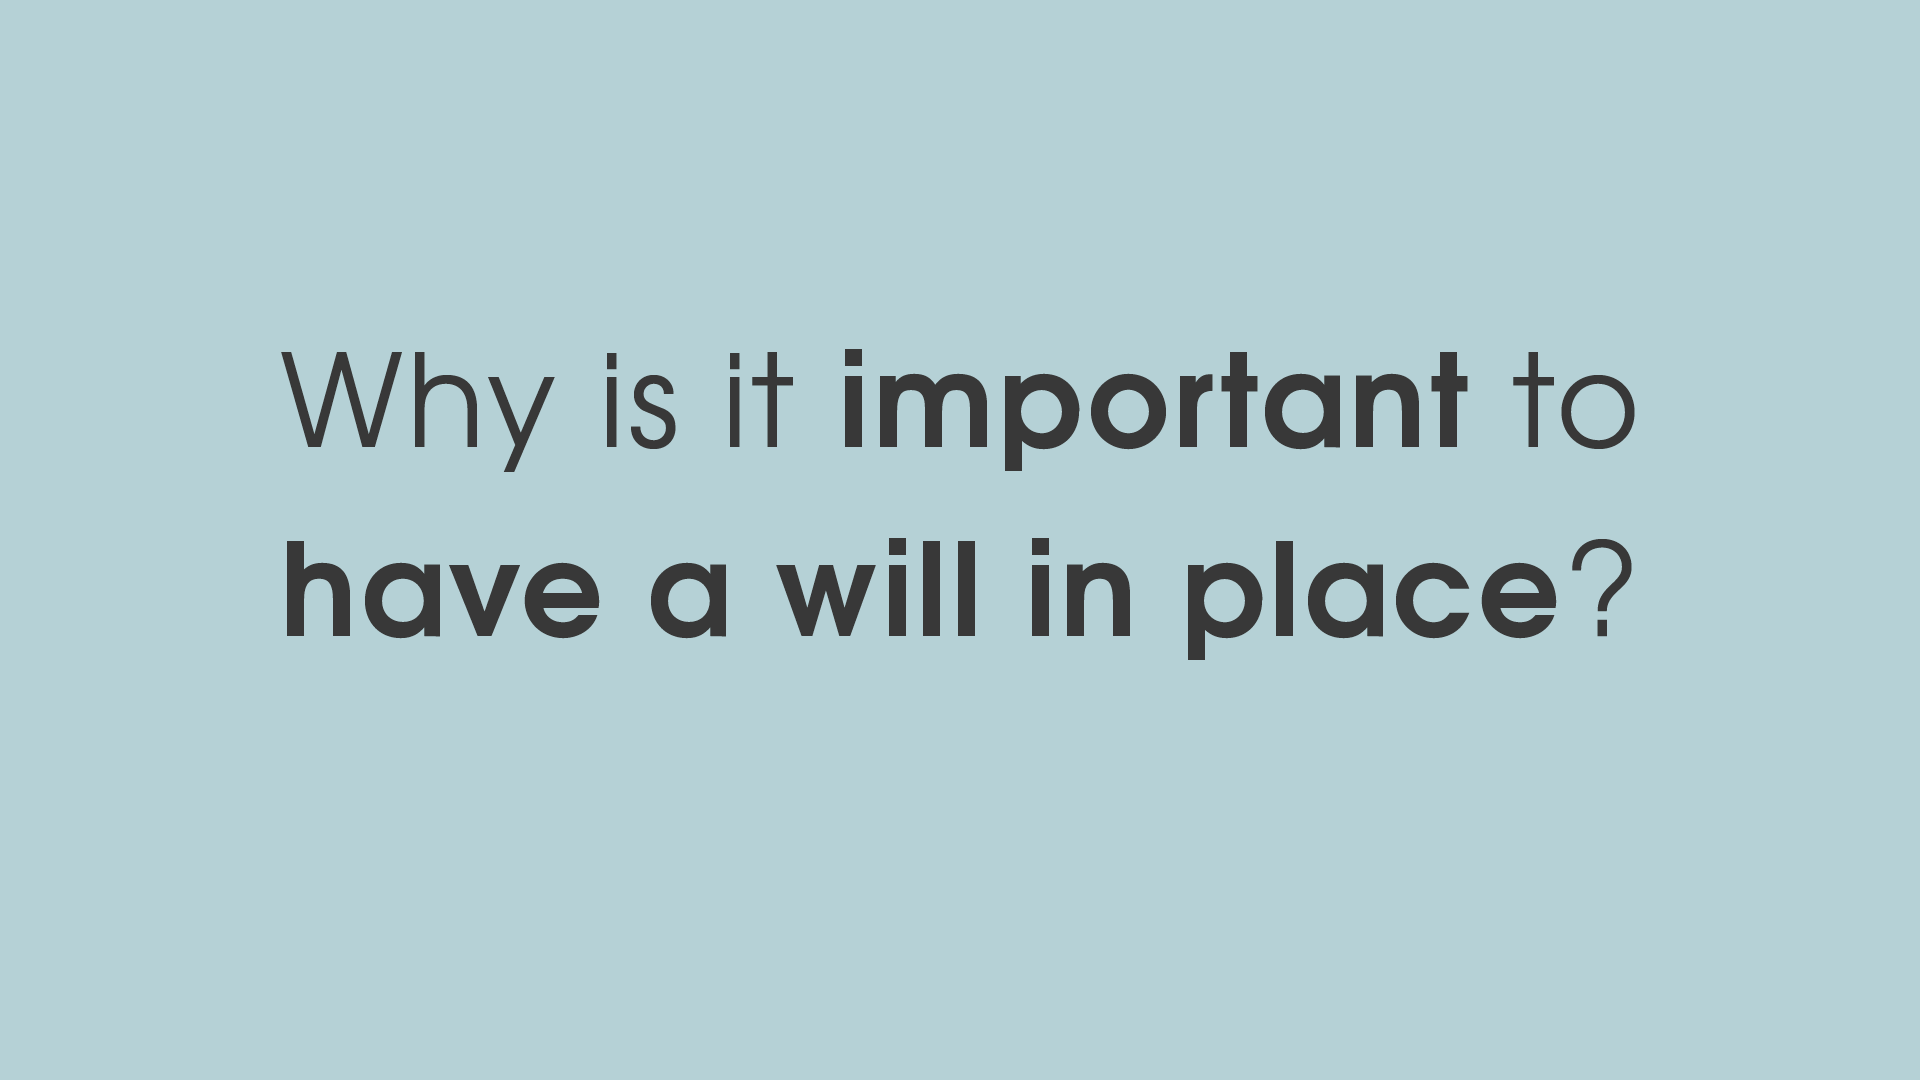 Why is it important to have a will in place?